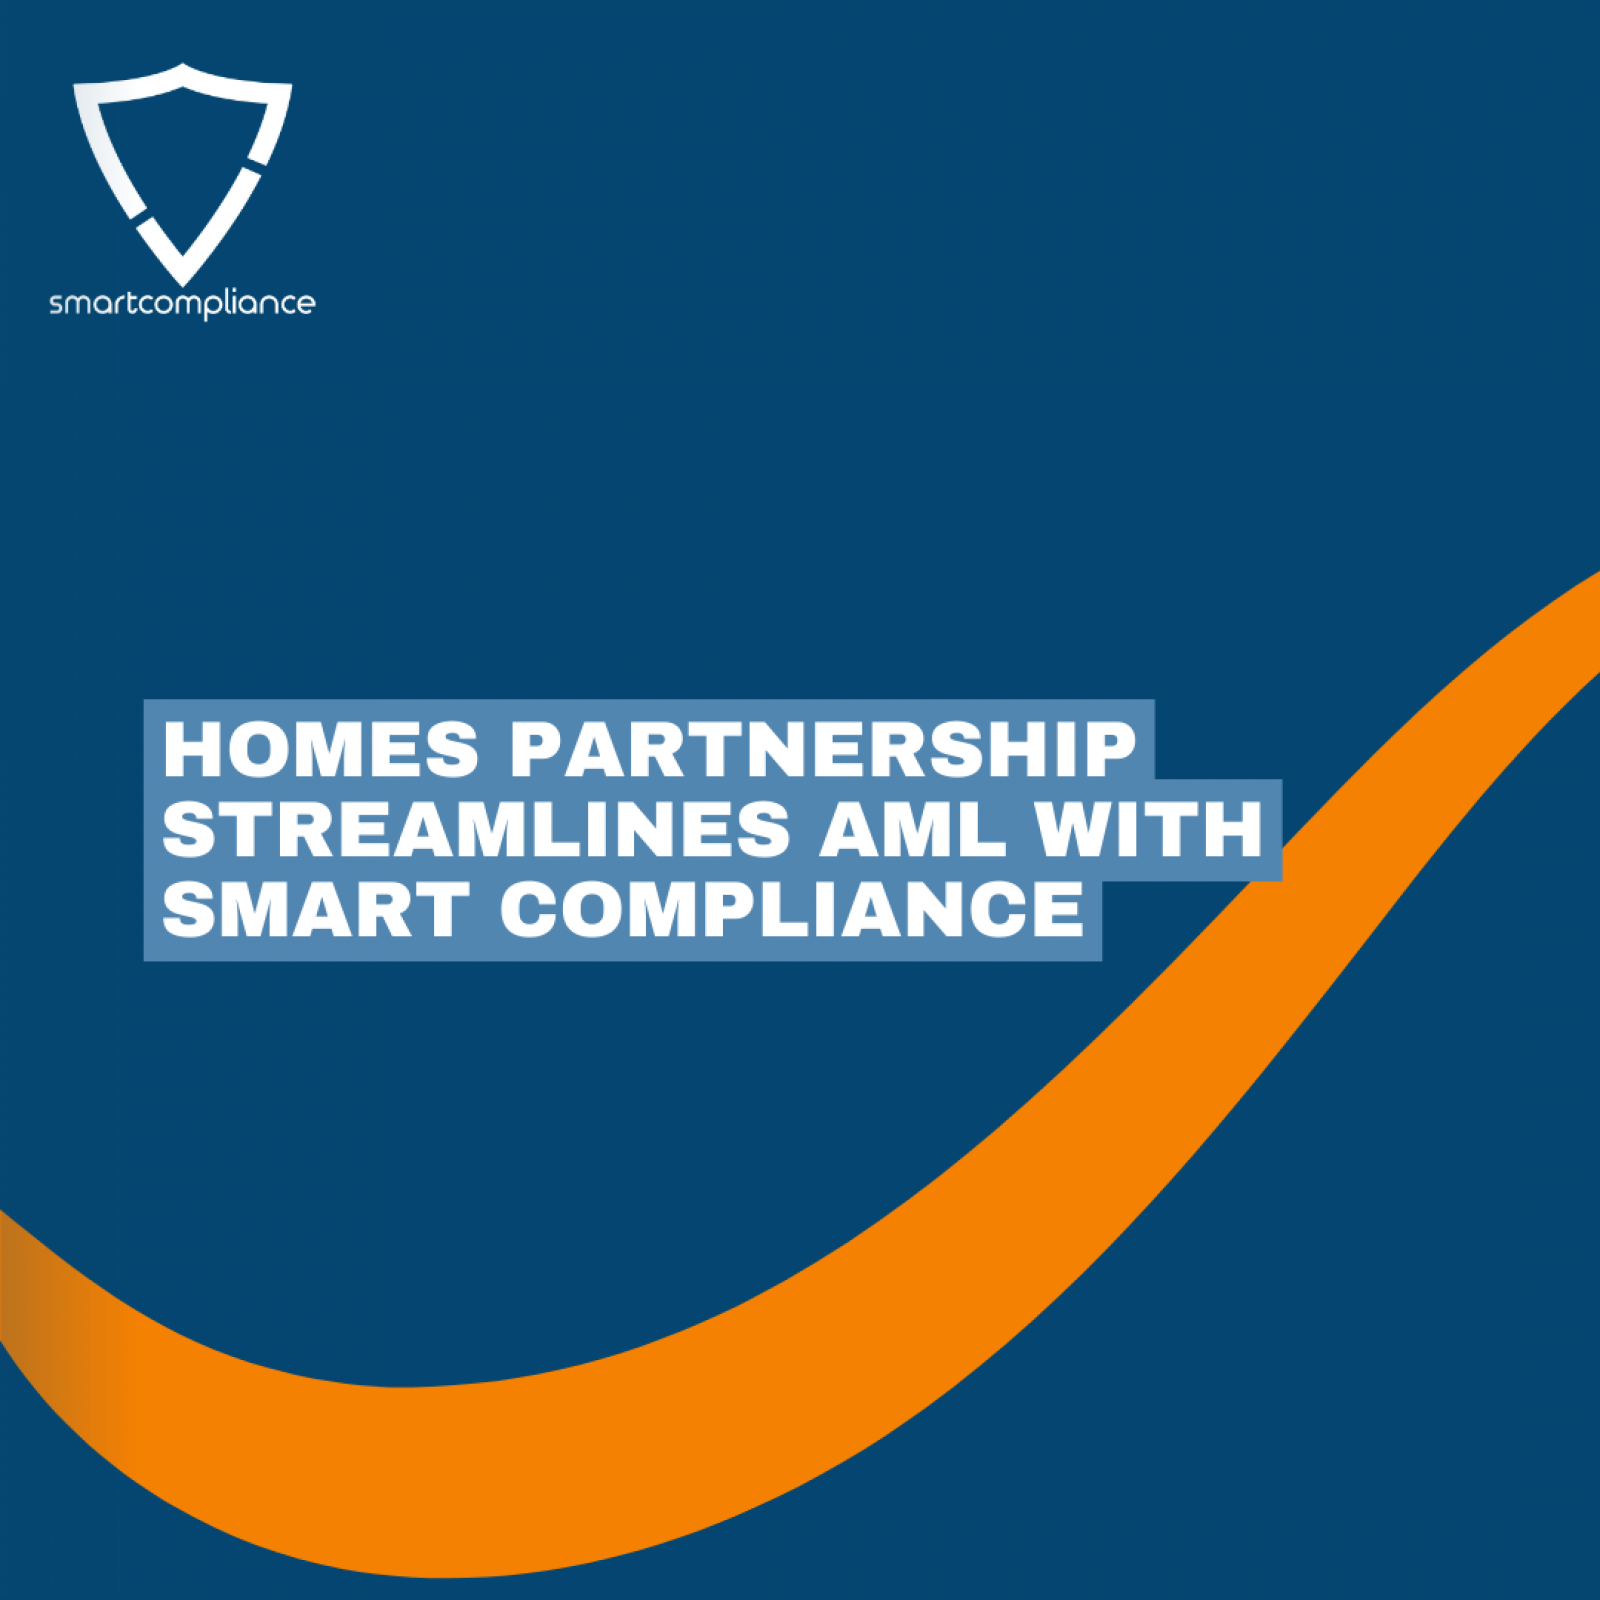 Homes Partnership Streamlines AML with Smart Compliance